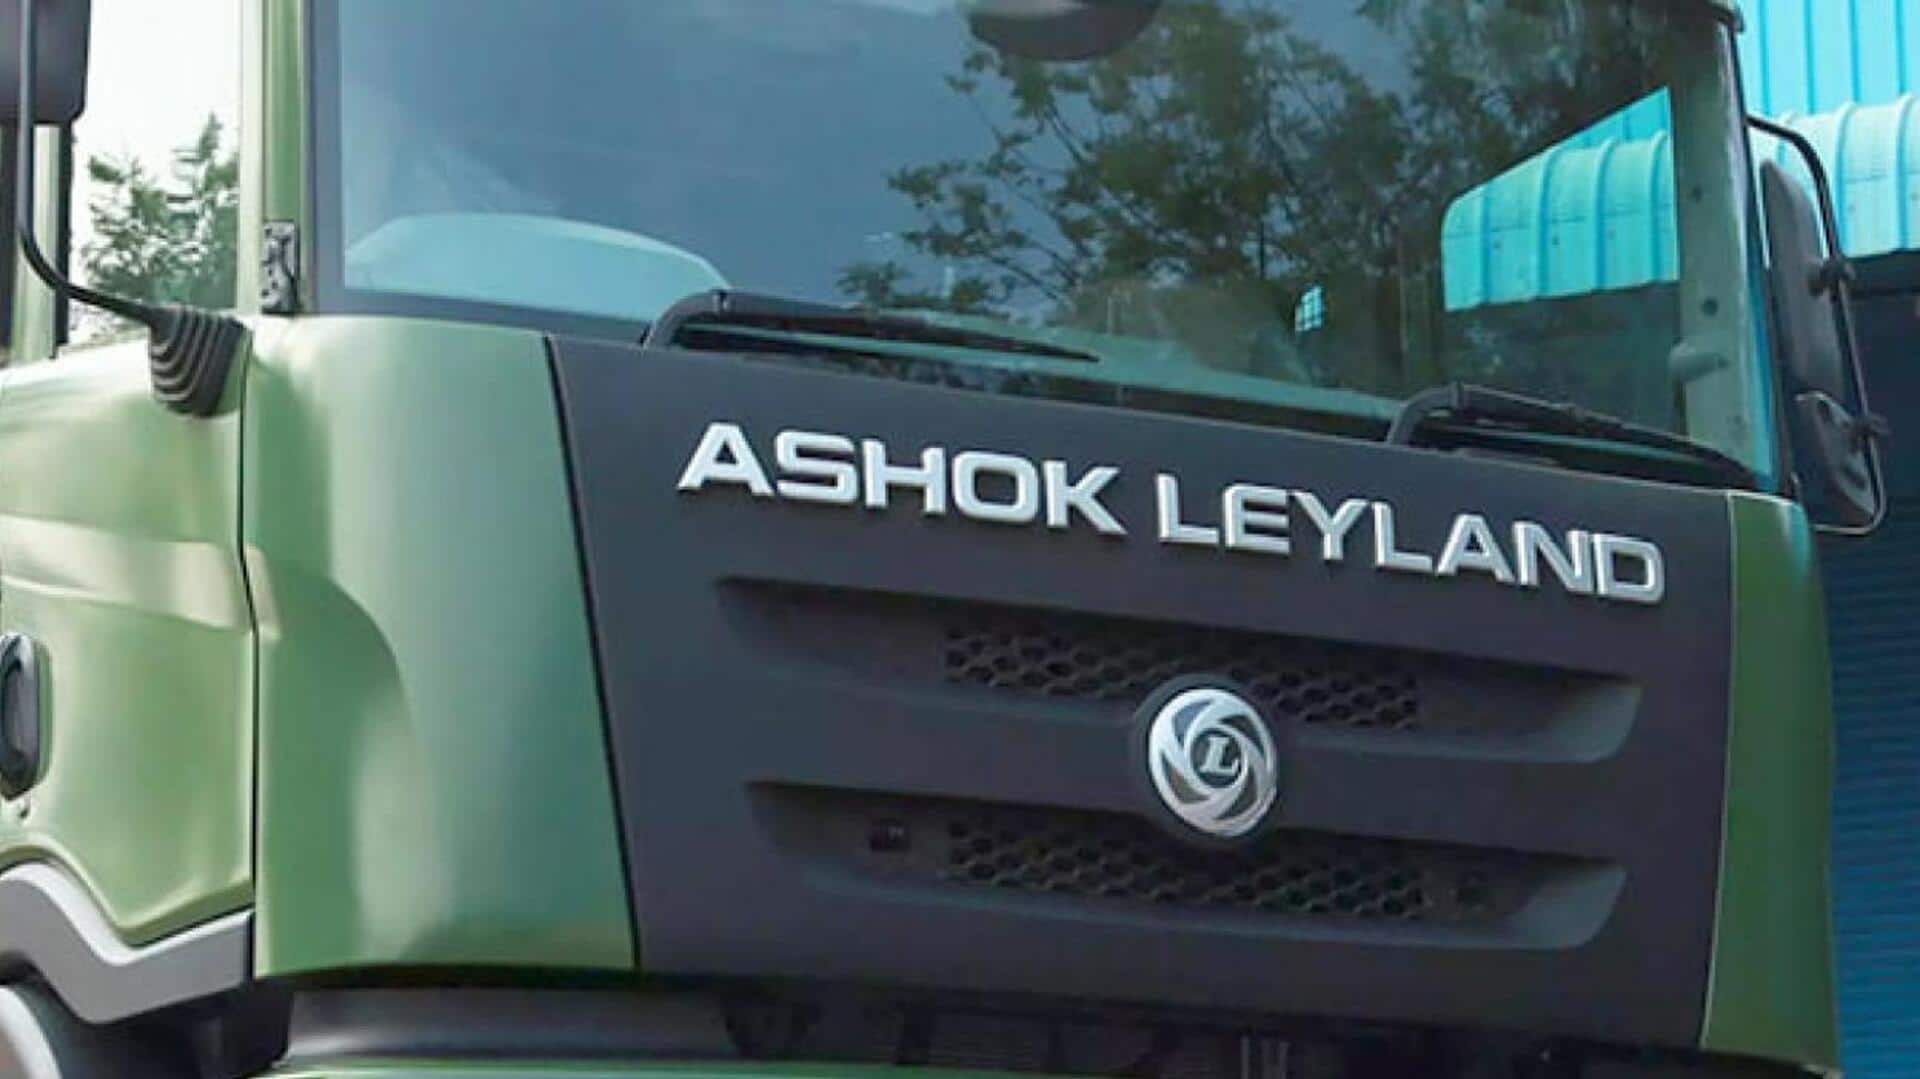 Ashok Leyland to set up Rs. 1,000cr plant in UP 